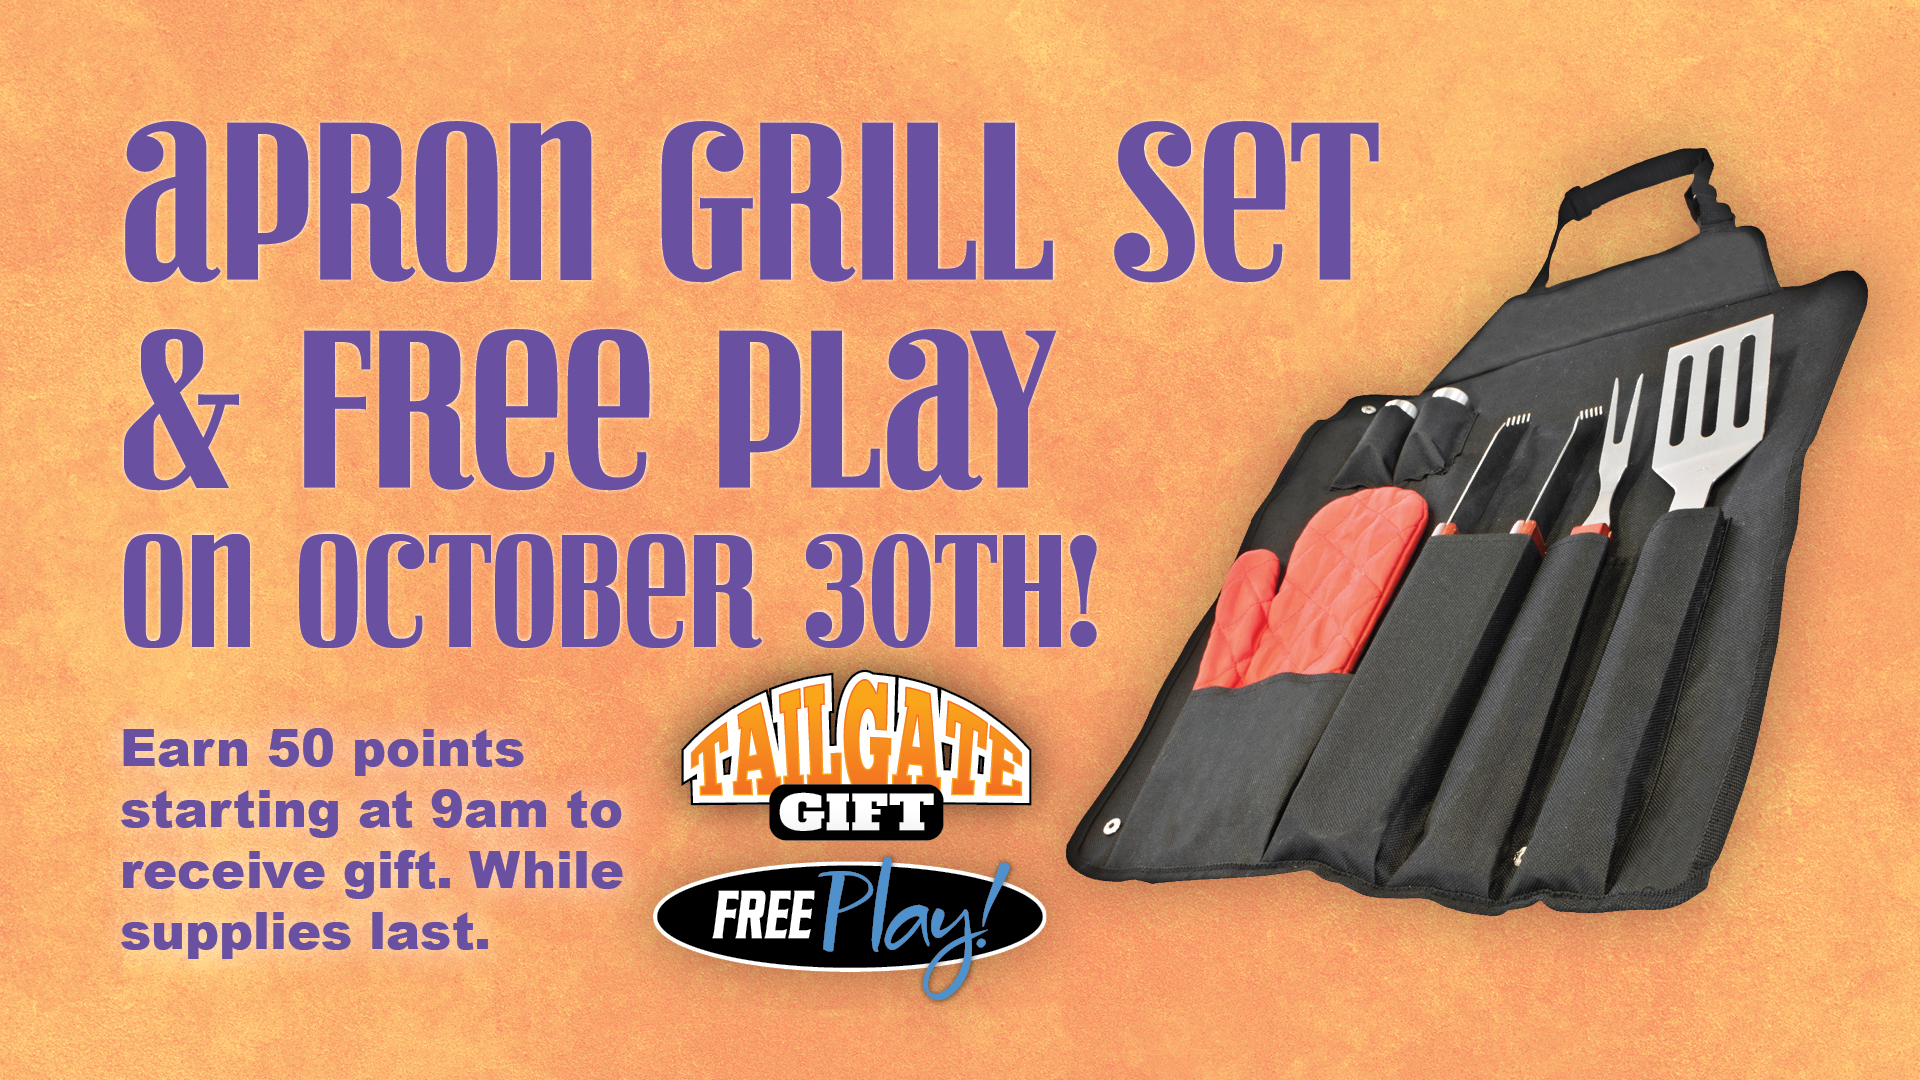 Apron Grill Set & Free Play on October 30th!